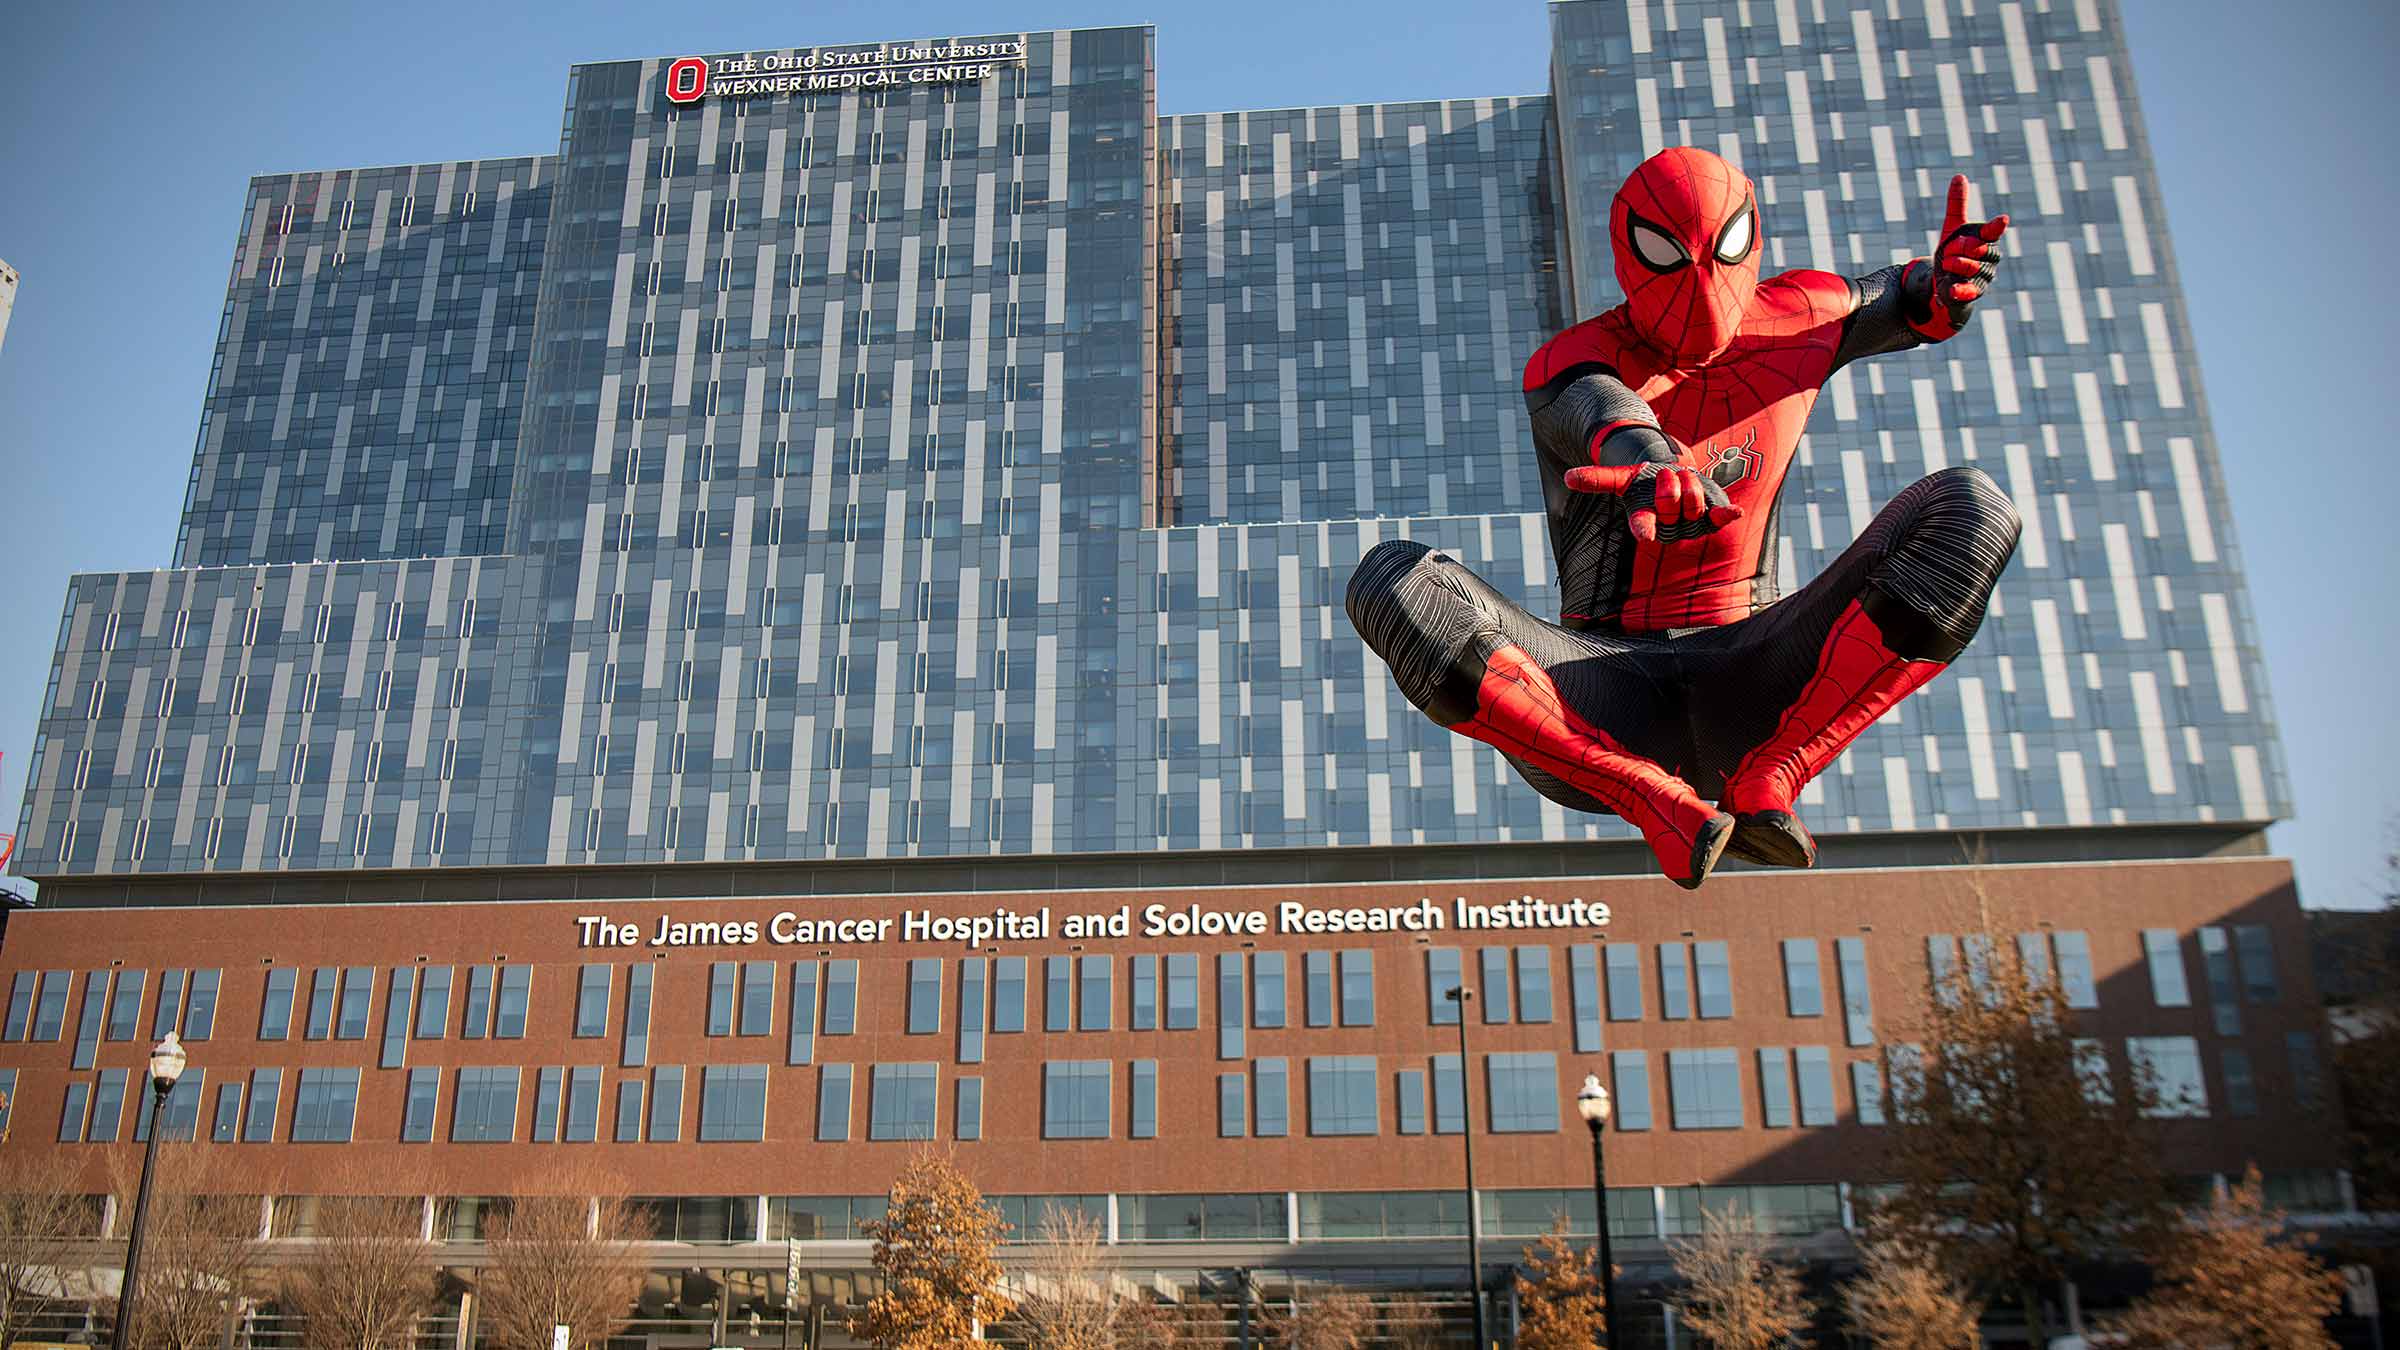 Spider-Man in a jump with the OSUCCC – James building on the background